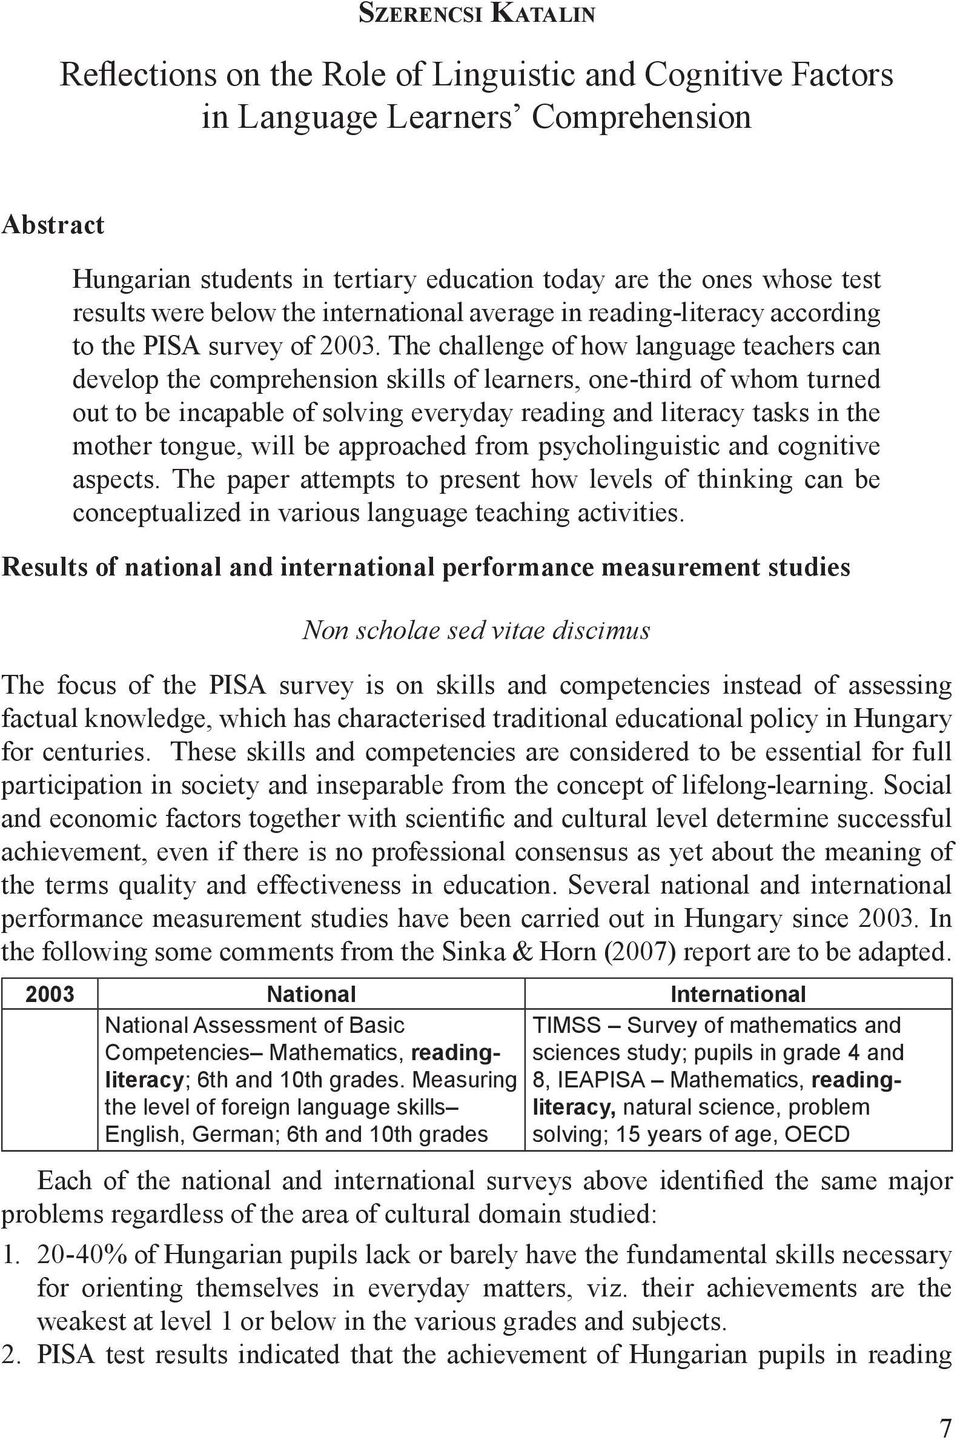 The challenge of how language teachers can develop the comprehension skills of learners, one-third of whom turned out to be incapable of solving everyday reading and literacy tasks in the mother